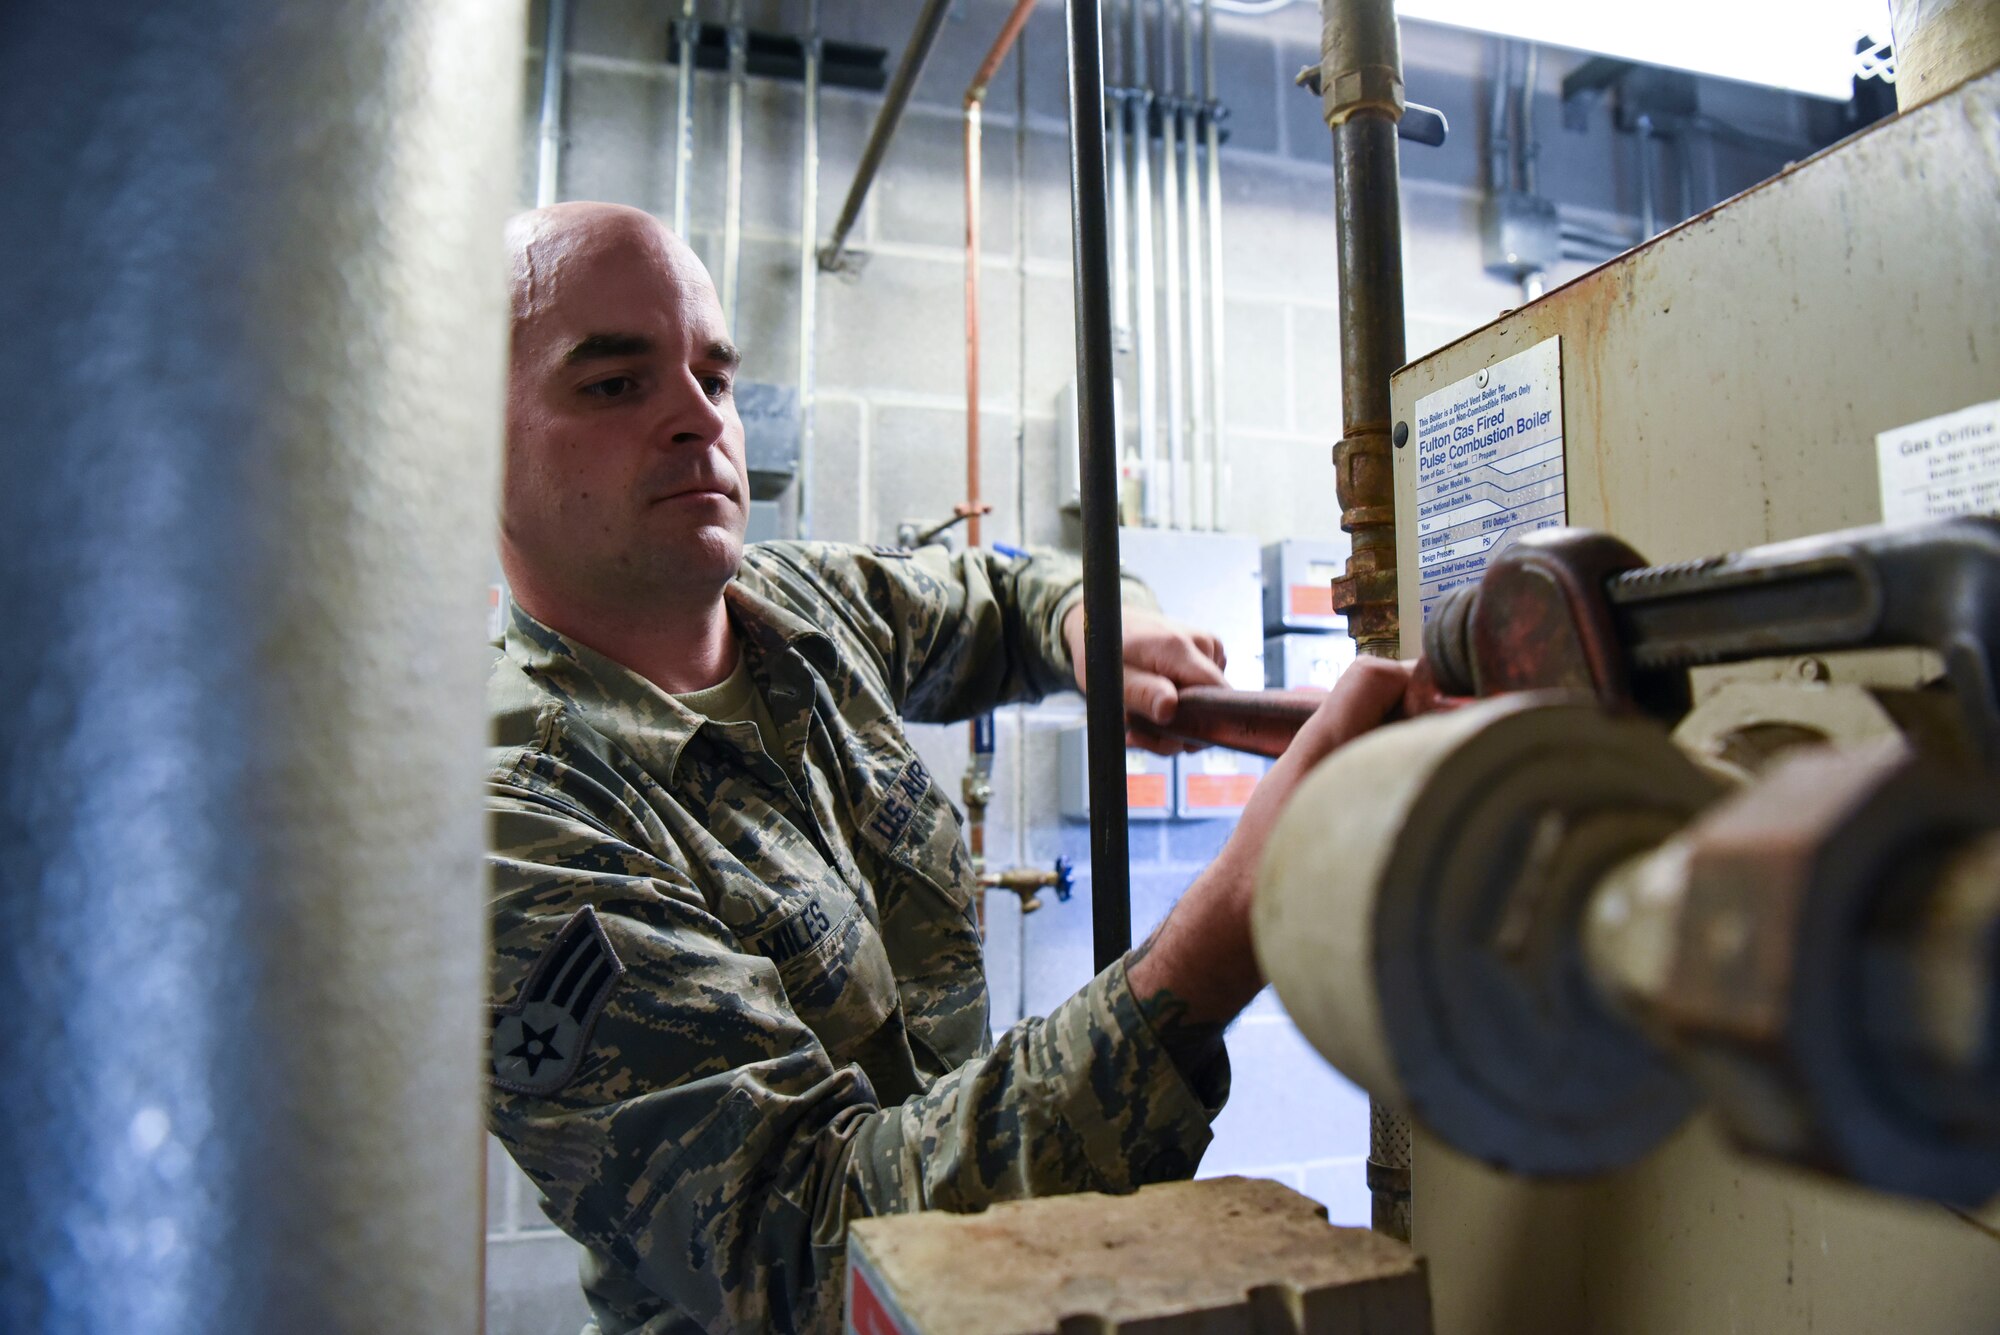 Senior Airman Tristan Miles, a 319th Civil Engineer Squadron heating, ventilation, air conditioning and refrigeration apprentice unscrews a water boiler June 20, 2018, on Grand Forks Air Force Base, North Dakota. Miles said that they open the front and back ends of the water boiler to check for any possible damage or overflow. (U.S. Air Force photo by Airman 1st Class Melody Wolff)